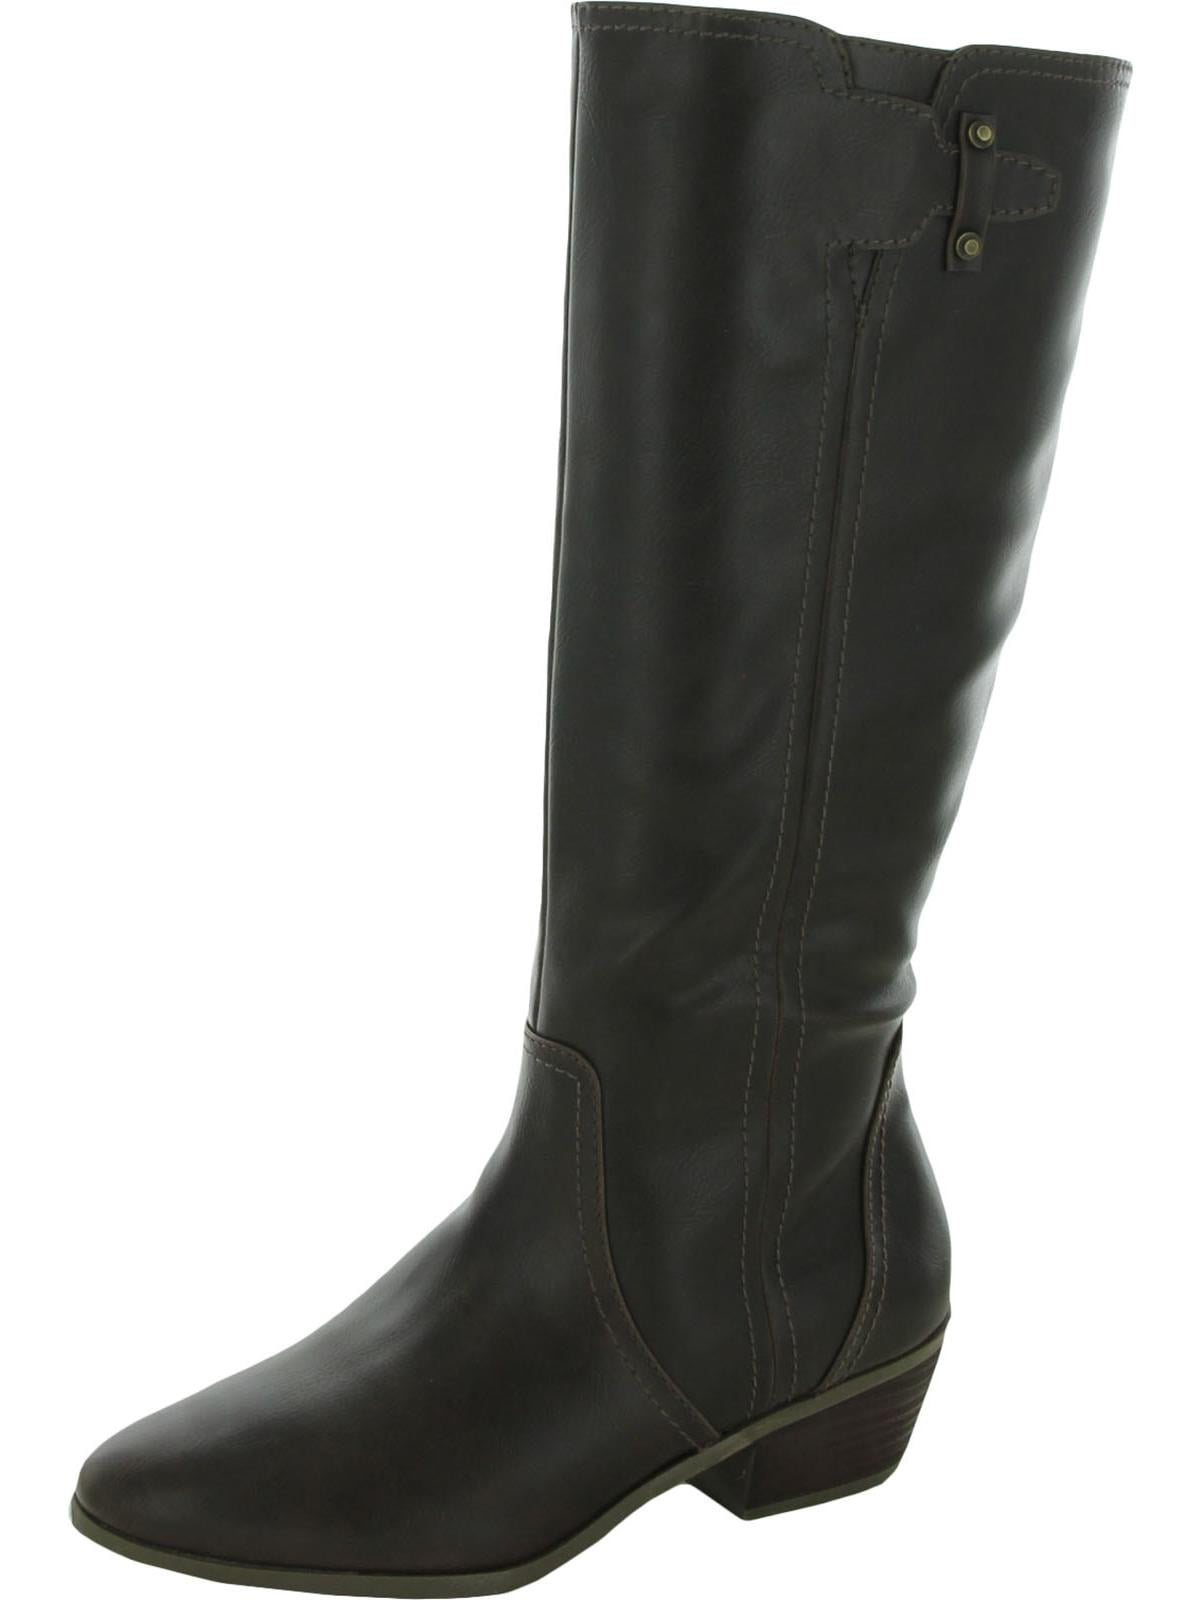 Dr. Scholl's Womens Brilliance Faux Leather Knee High Riding Boots ...